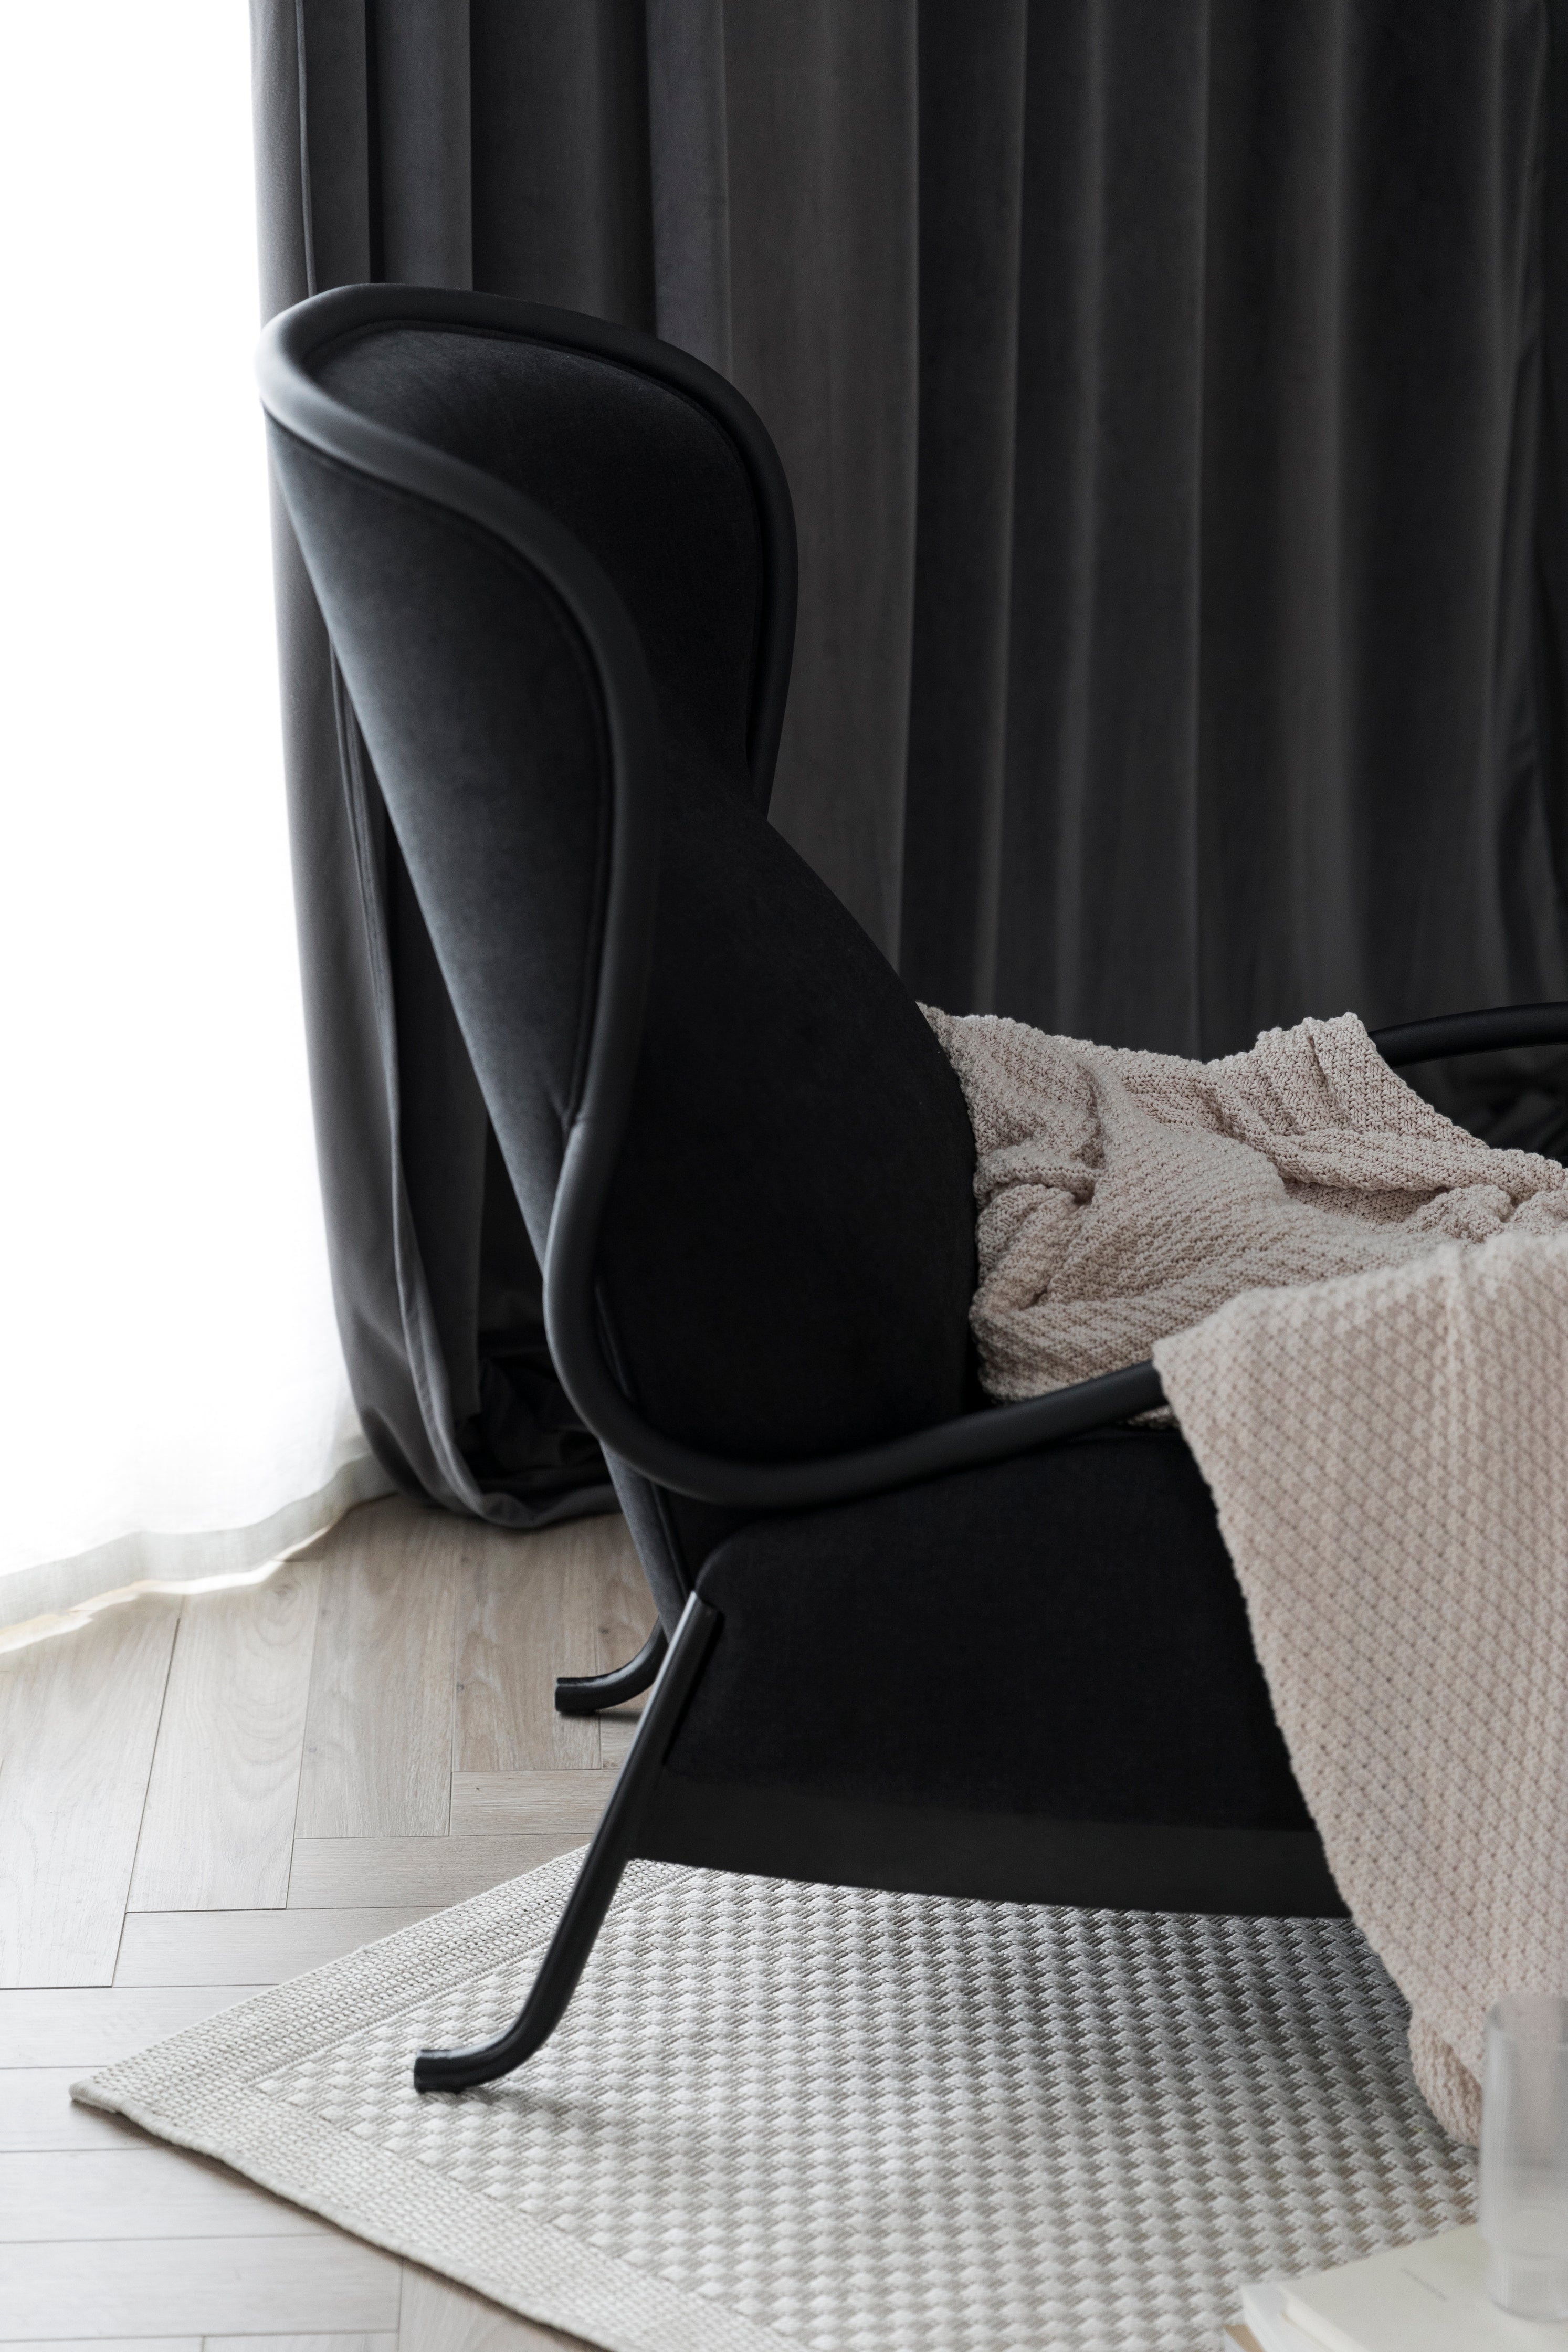 STAY WITH ME SOFA Chair ziinlife Black